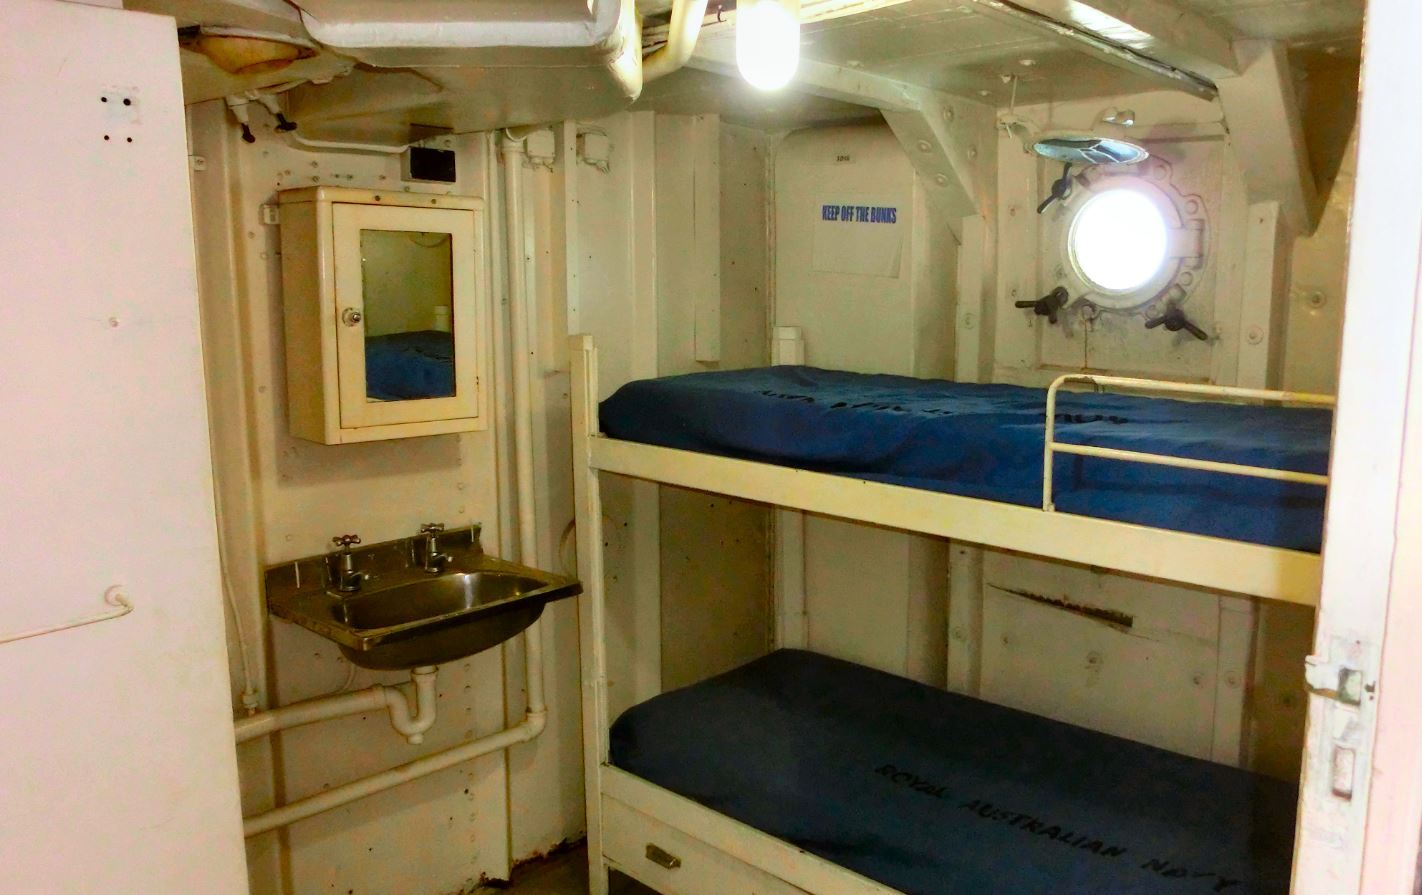 Petty Officers' Mess